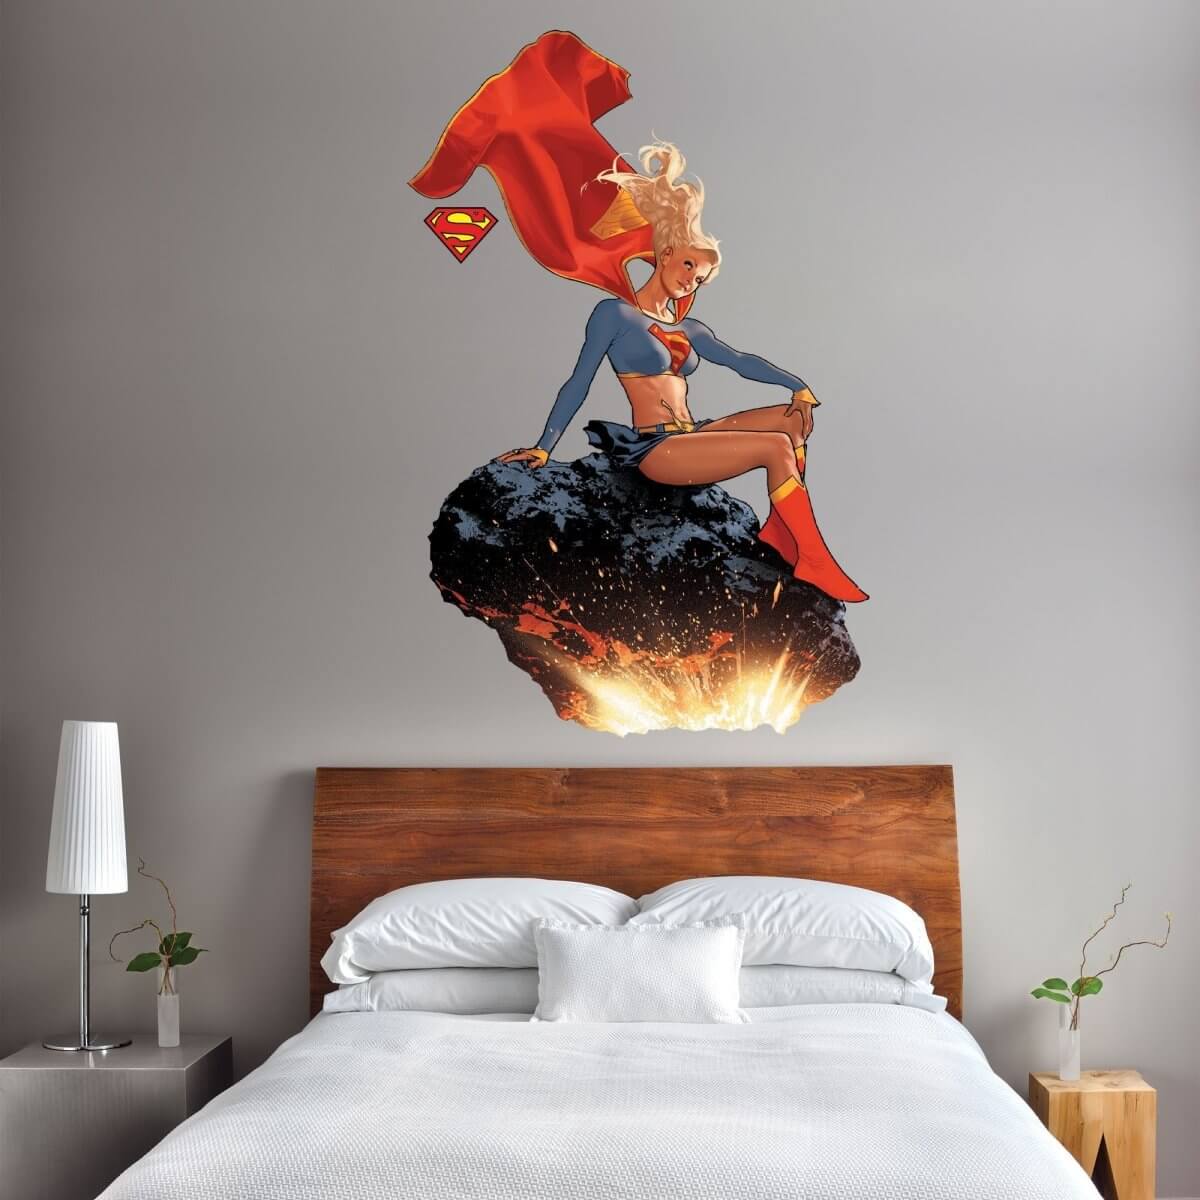 Kismet Decals Supergirl and the LoSH #23 Comic Cover Series Licensed Wall Sticker - Easy DIY Home & Room Decor Wall Art - Kismet Decals